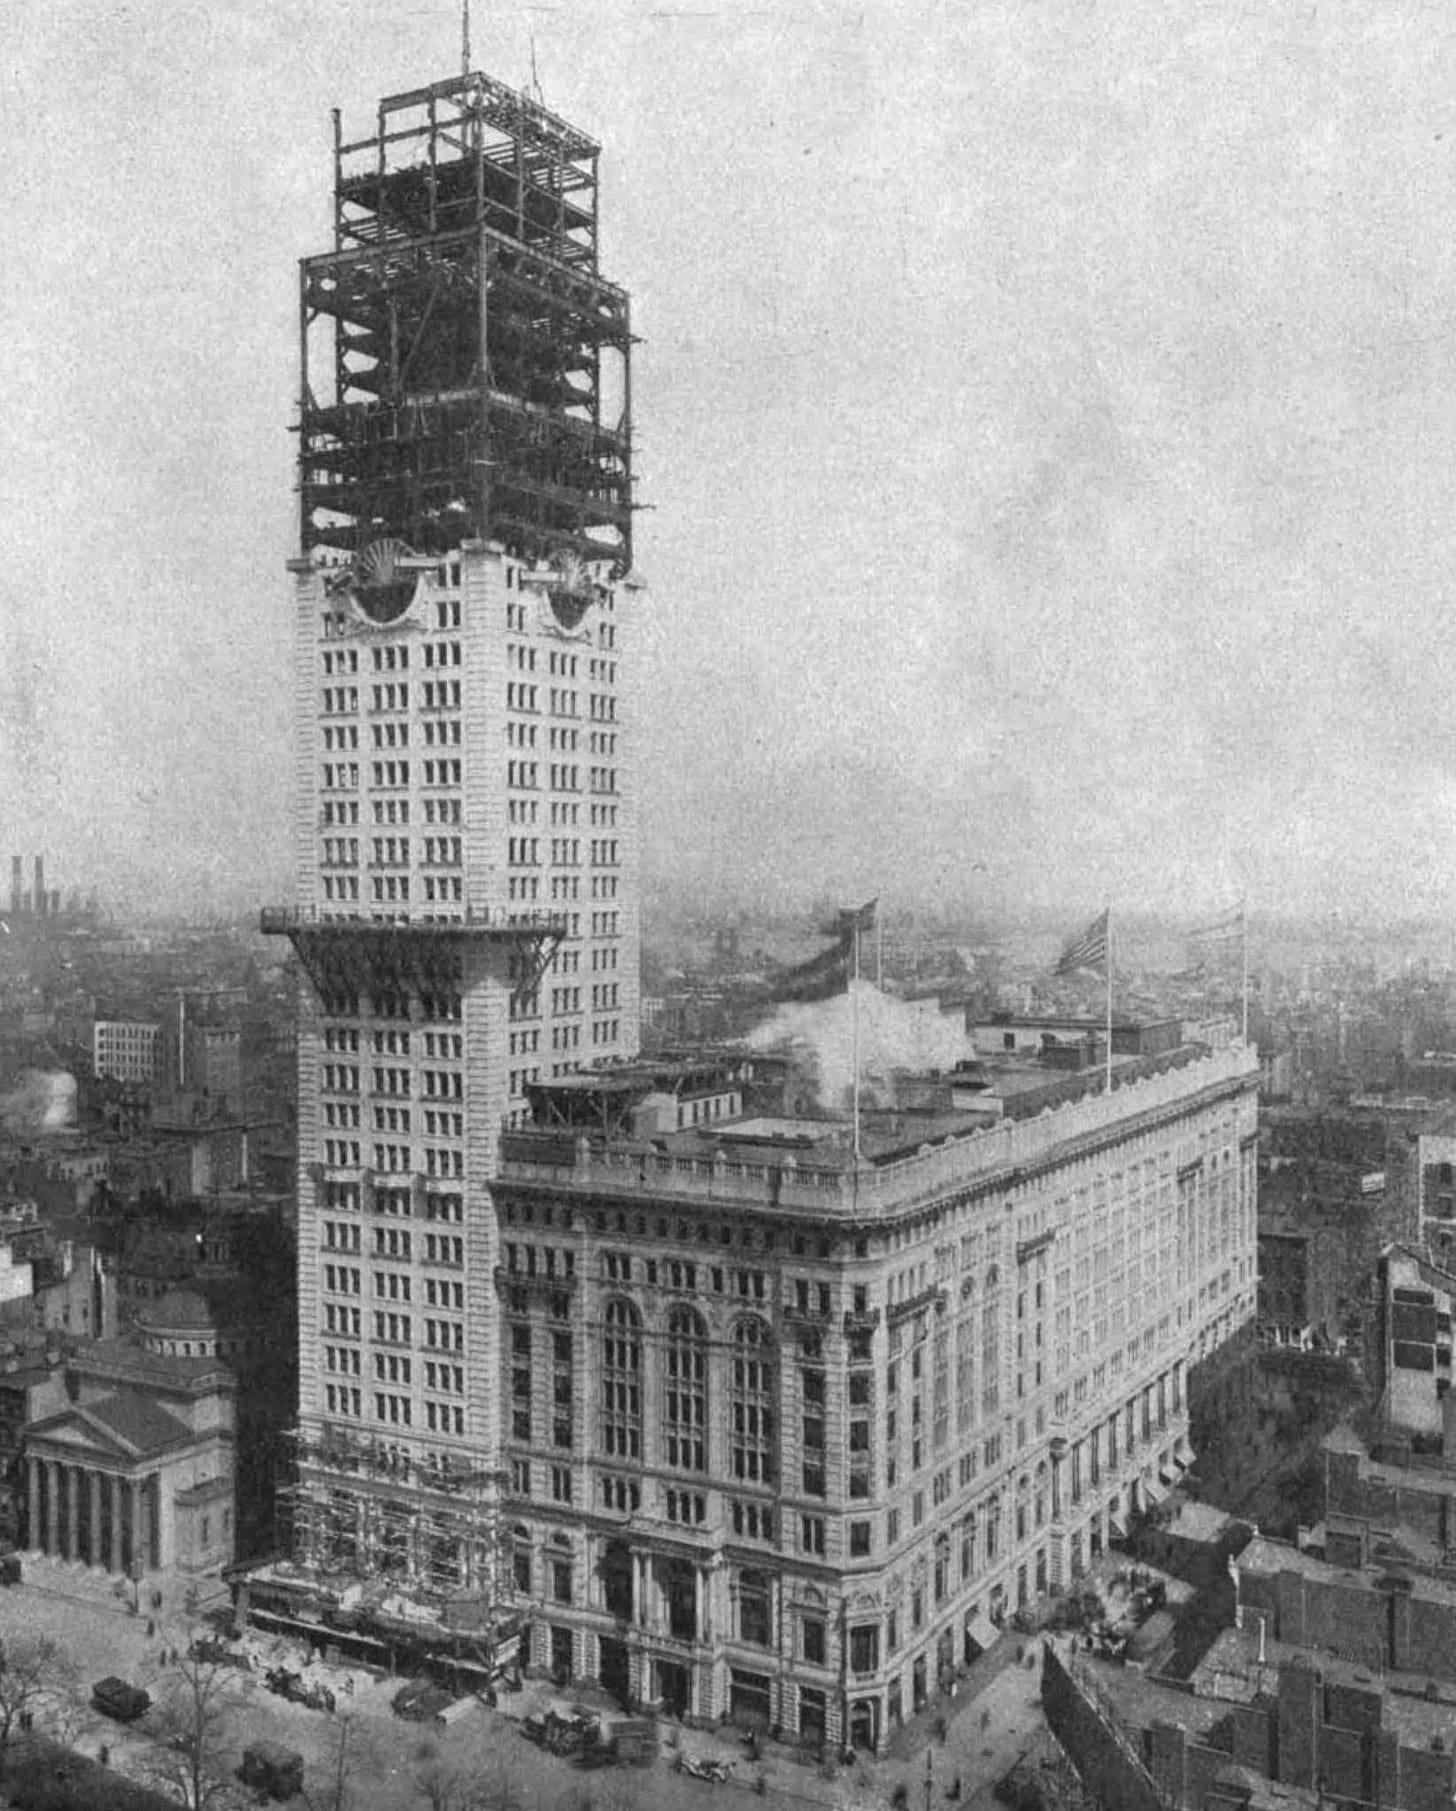 File:Met Life Tower building under construction 1908.jpg - Wikipedia